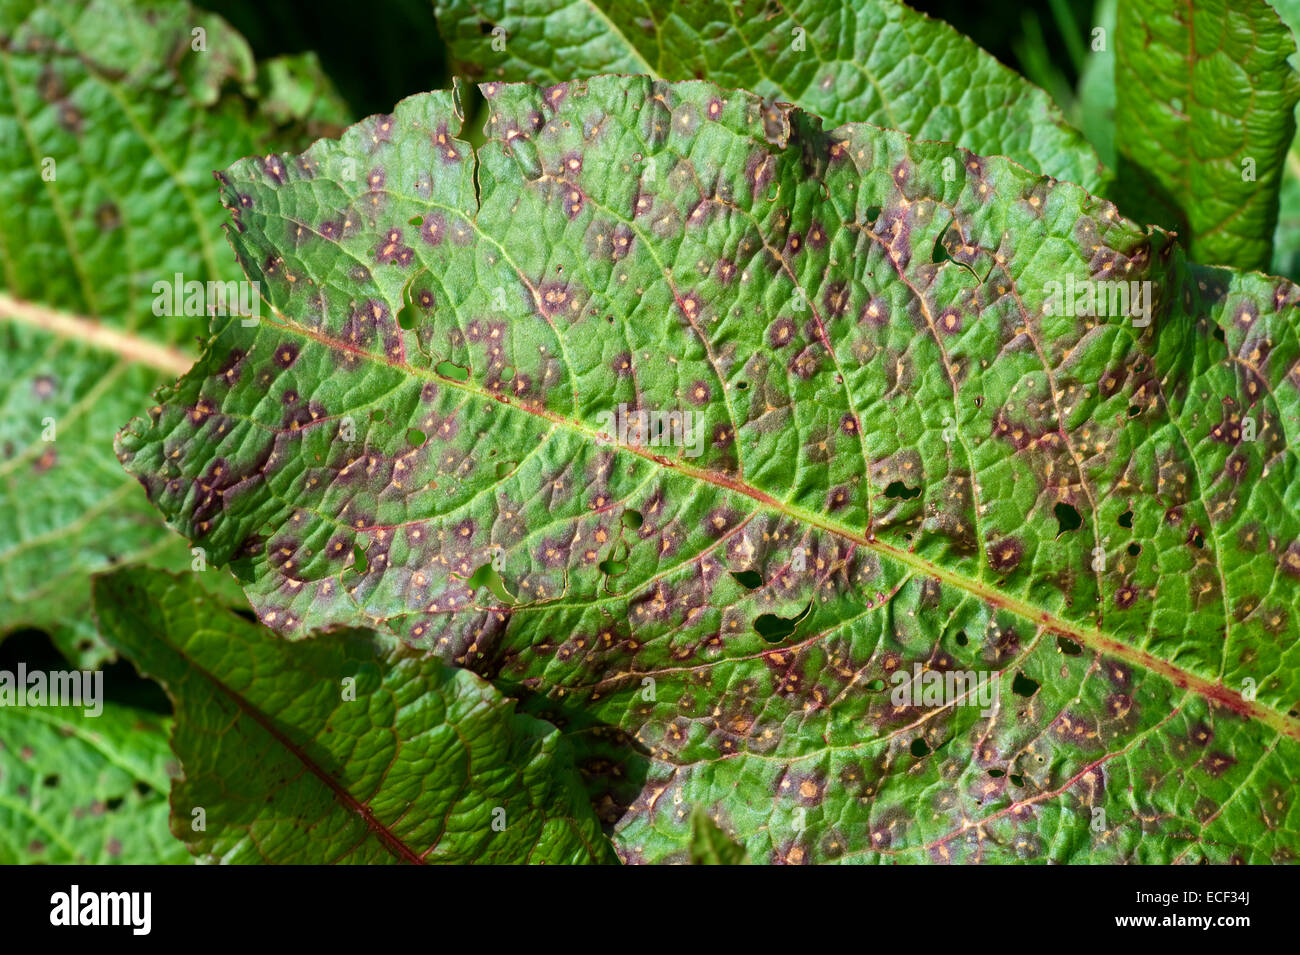 A leaf spot, Ramularia rubella, seriously affecting a leaf of broad dock, Rumex obtusifolius, Berkshire, May Stock Photo